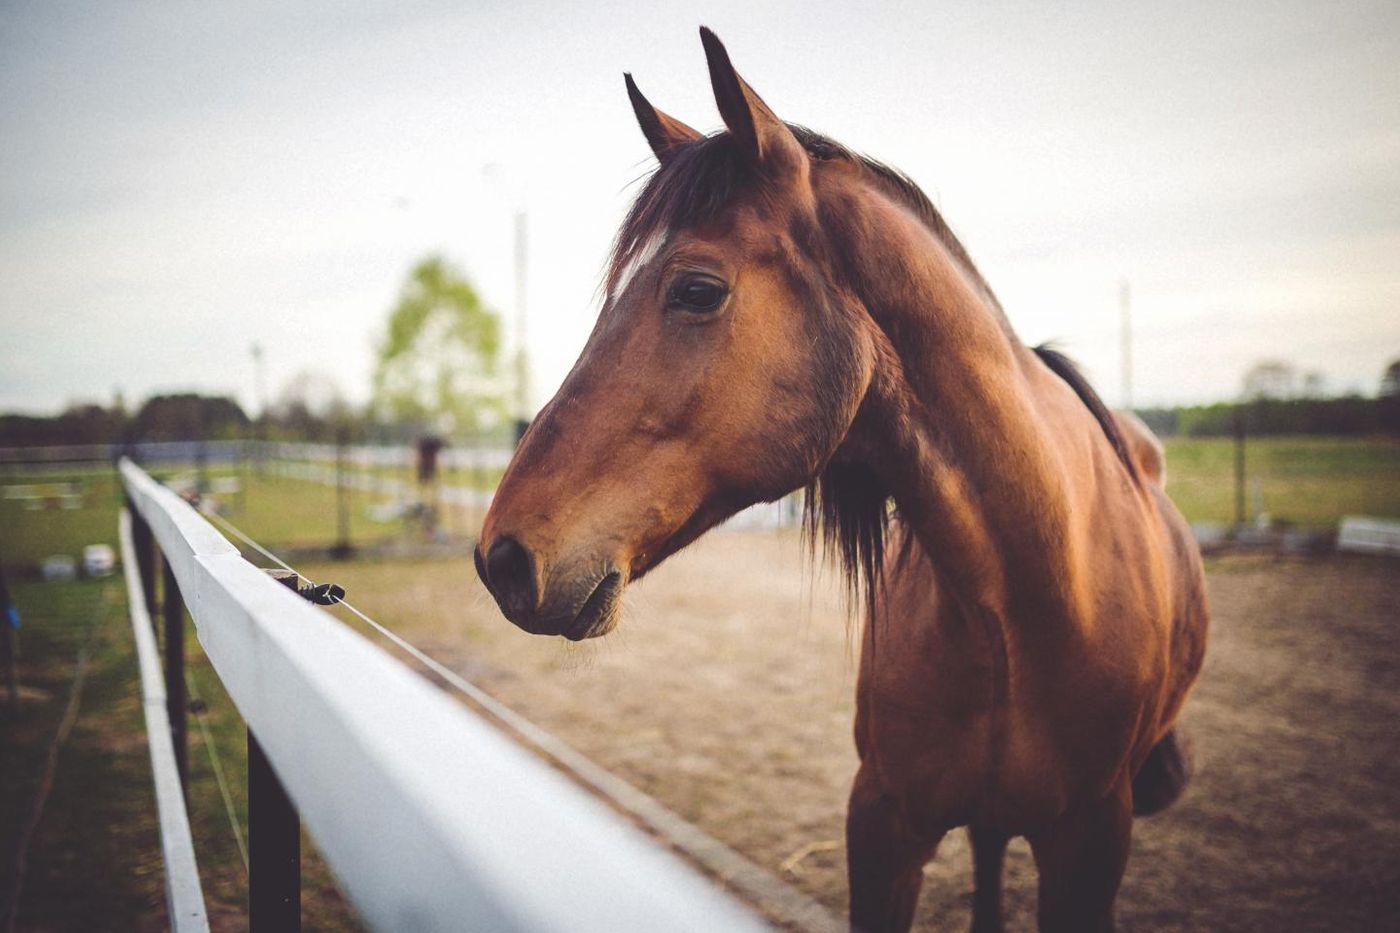 Flu vaccines for horses haven't been updated in more than 25 years, but researchers have developed a new live equine influenza vaccine that's safe and more protective. Credit: University of Rochester Medical Center